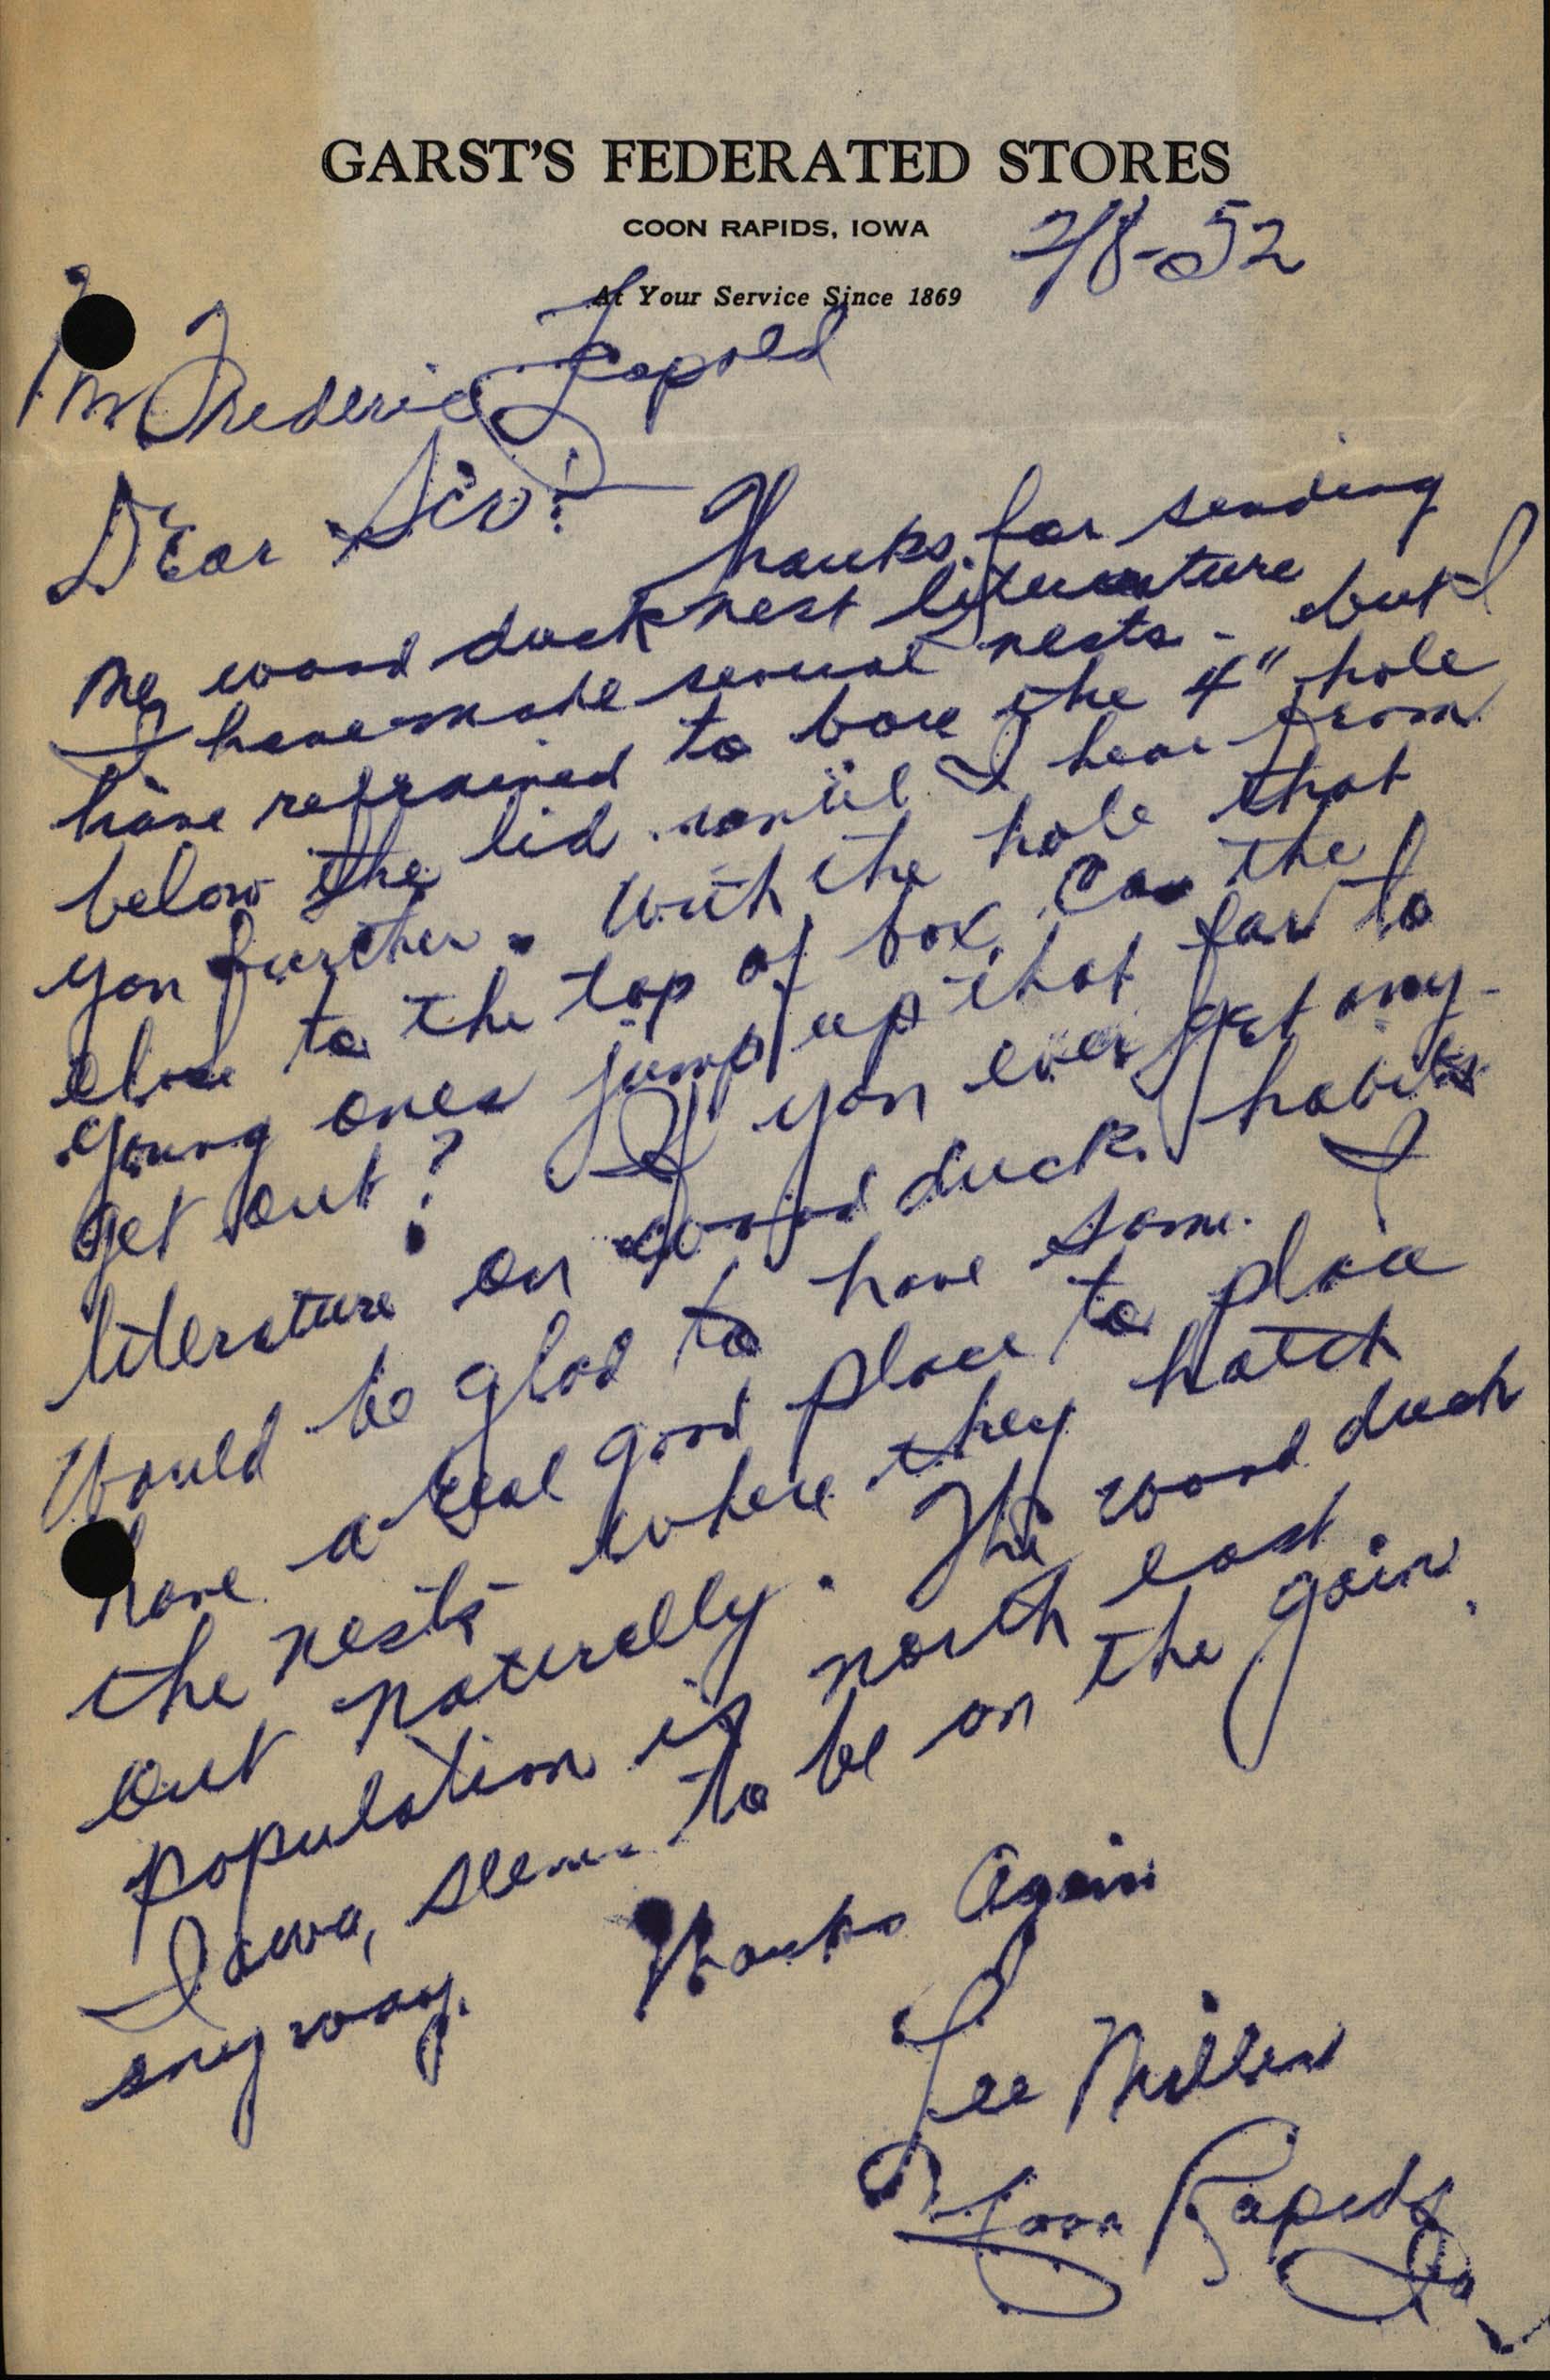 Lee Miller letter to Frederic Leopold regarding Wood Duck houses, February 8, 1952